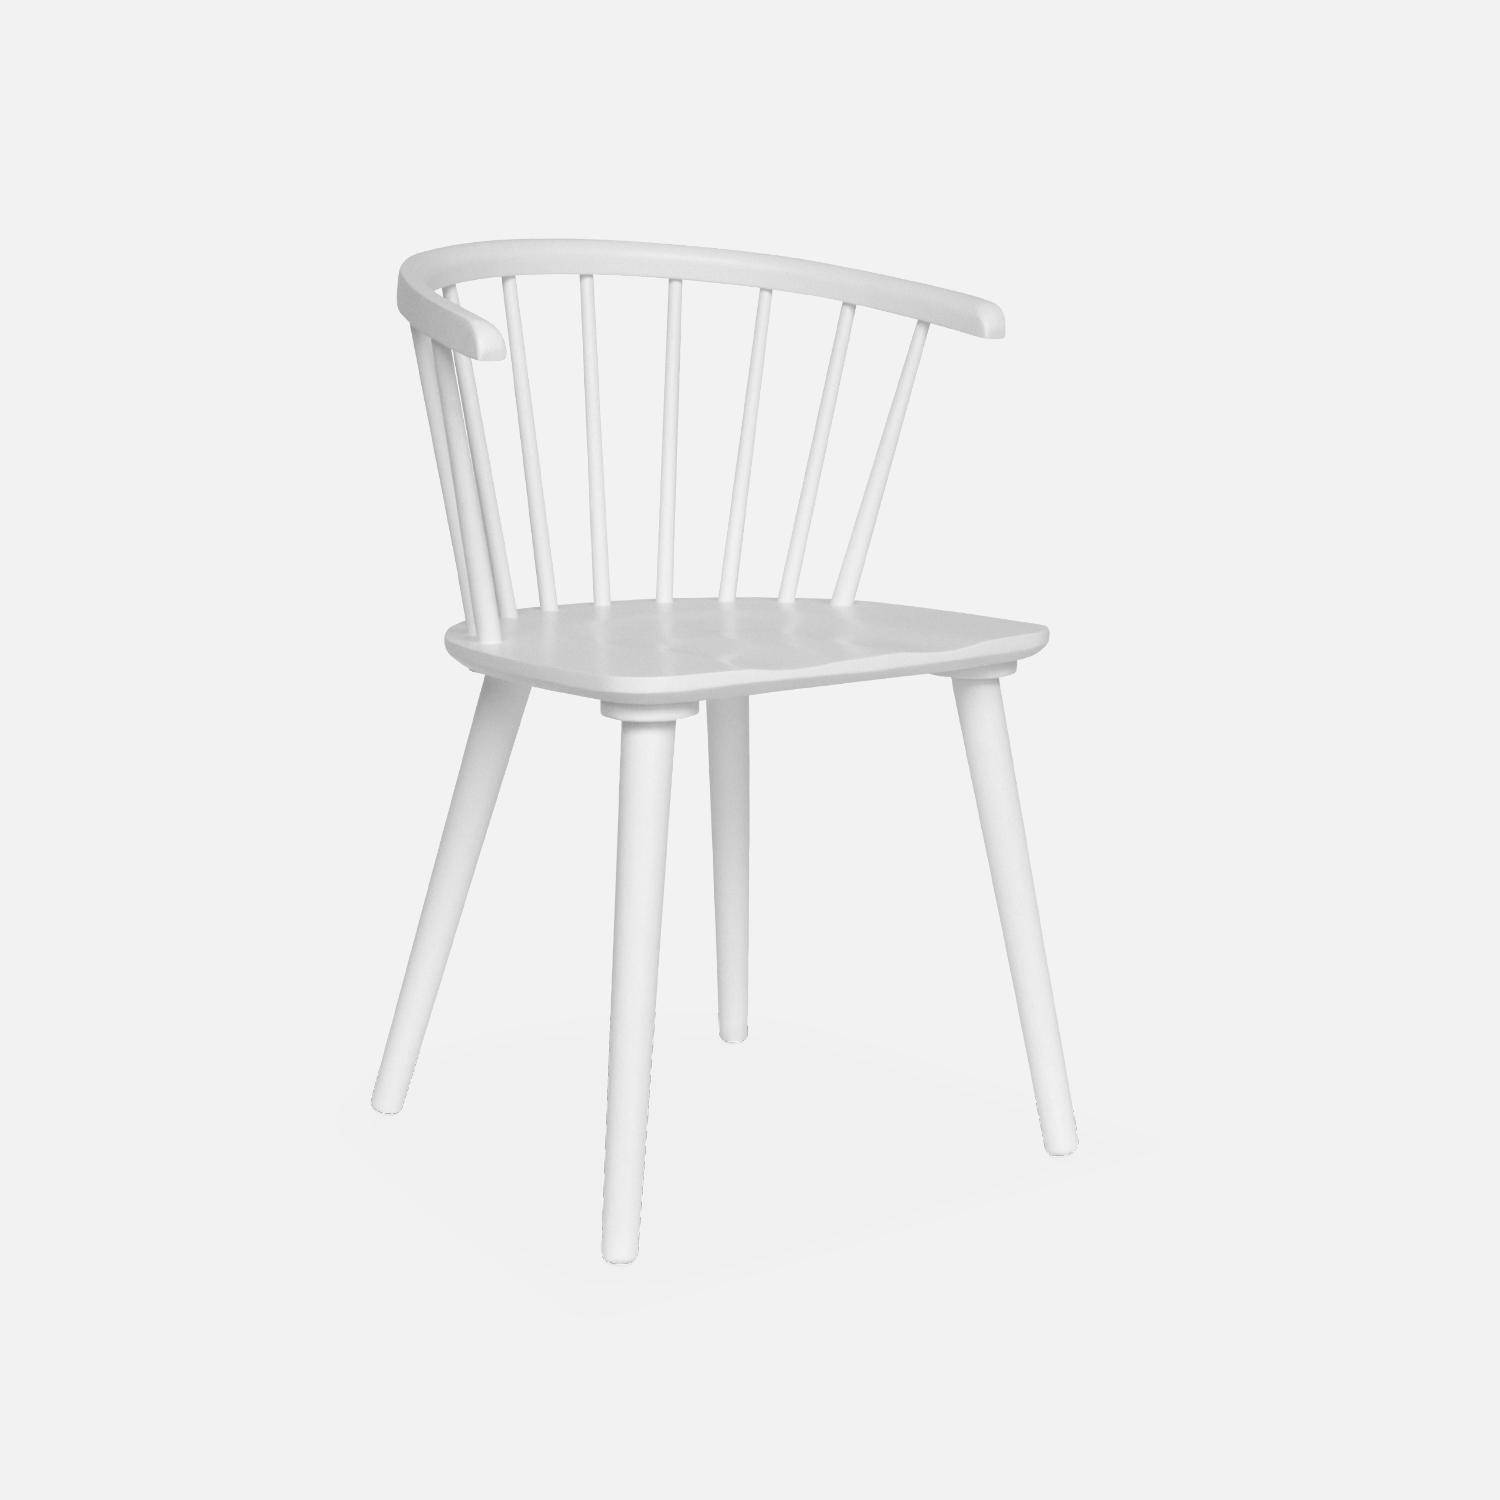 Pair of Wood and Plywood Spindle Chairs, white, L53 x W47.5 x H76cm Photo5